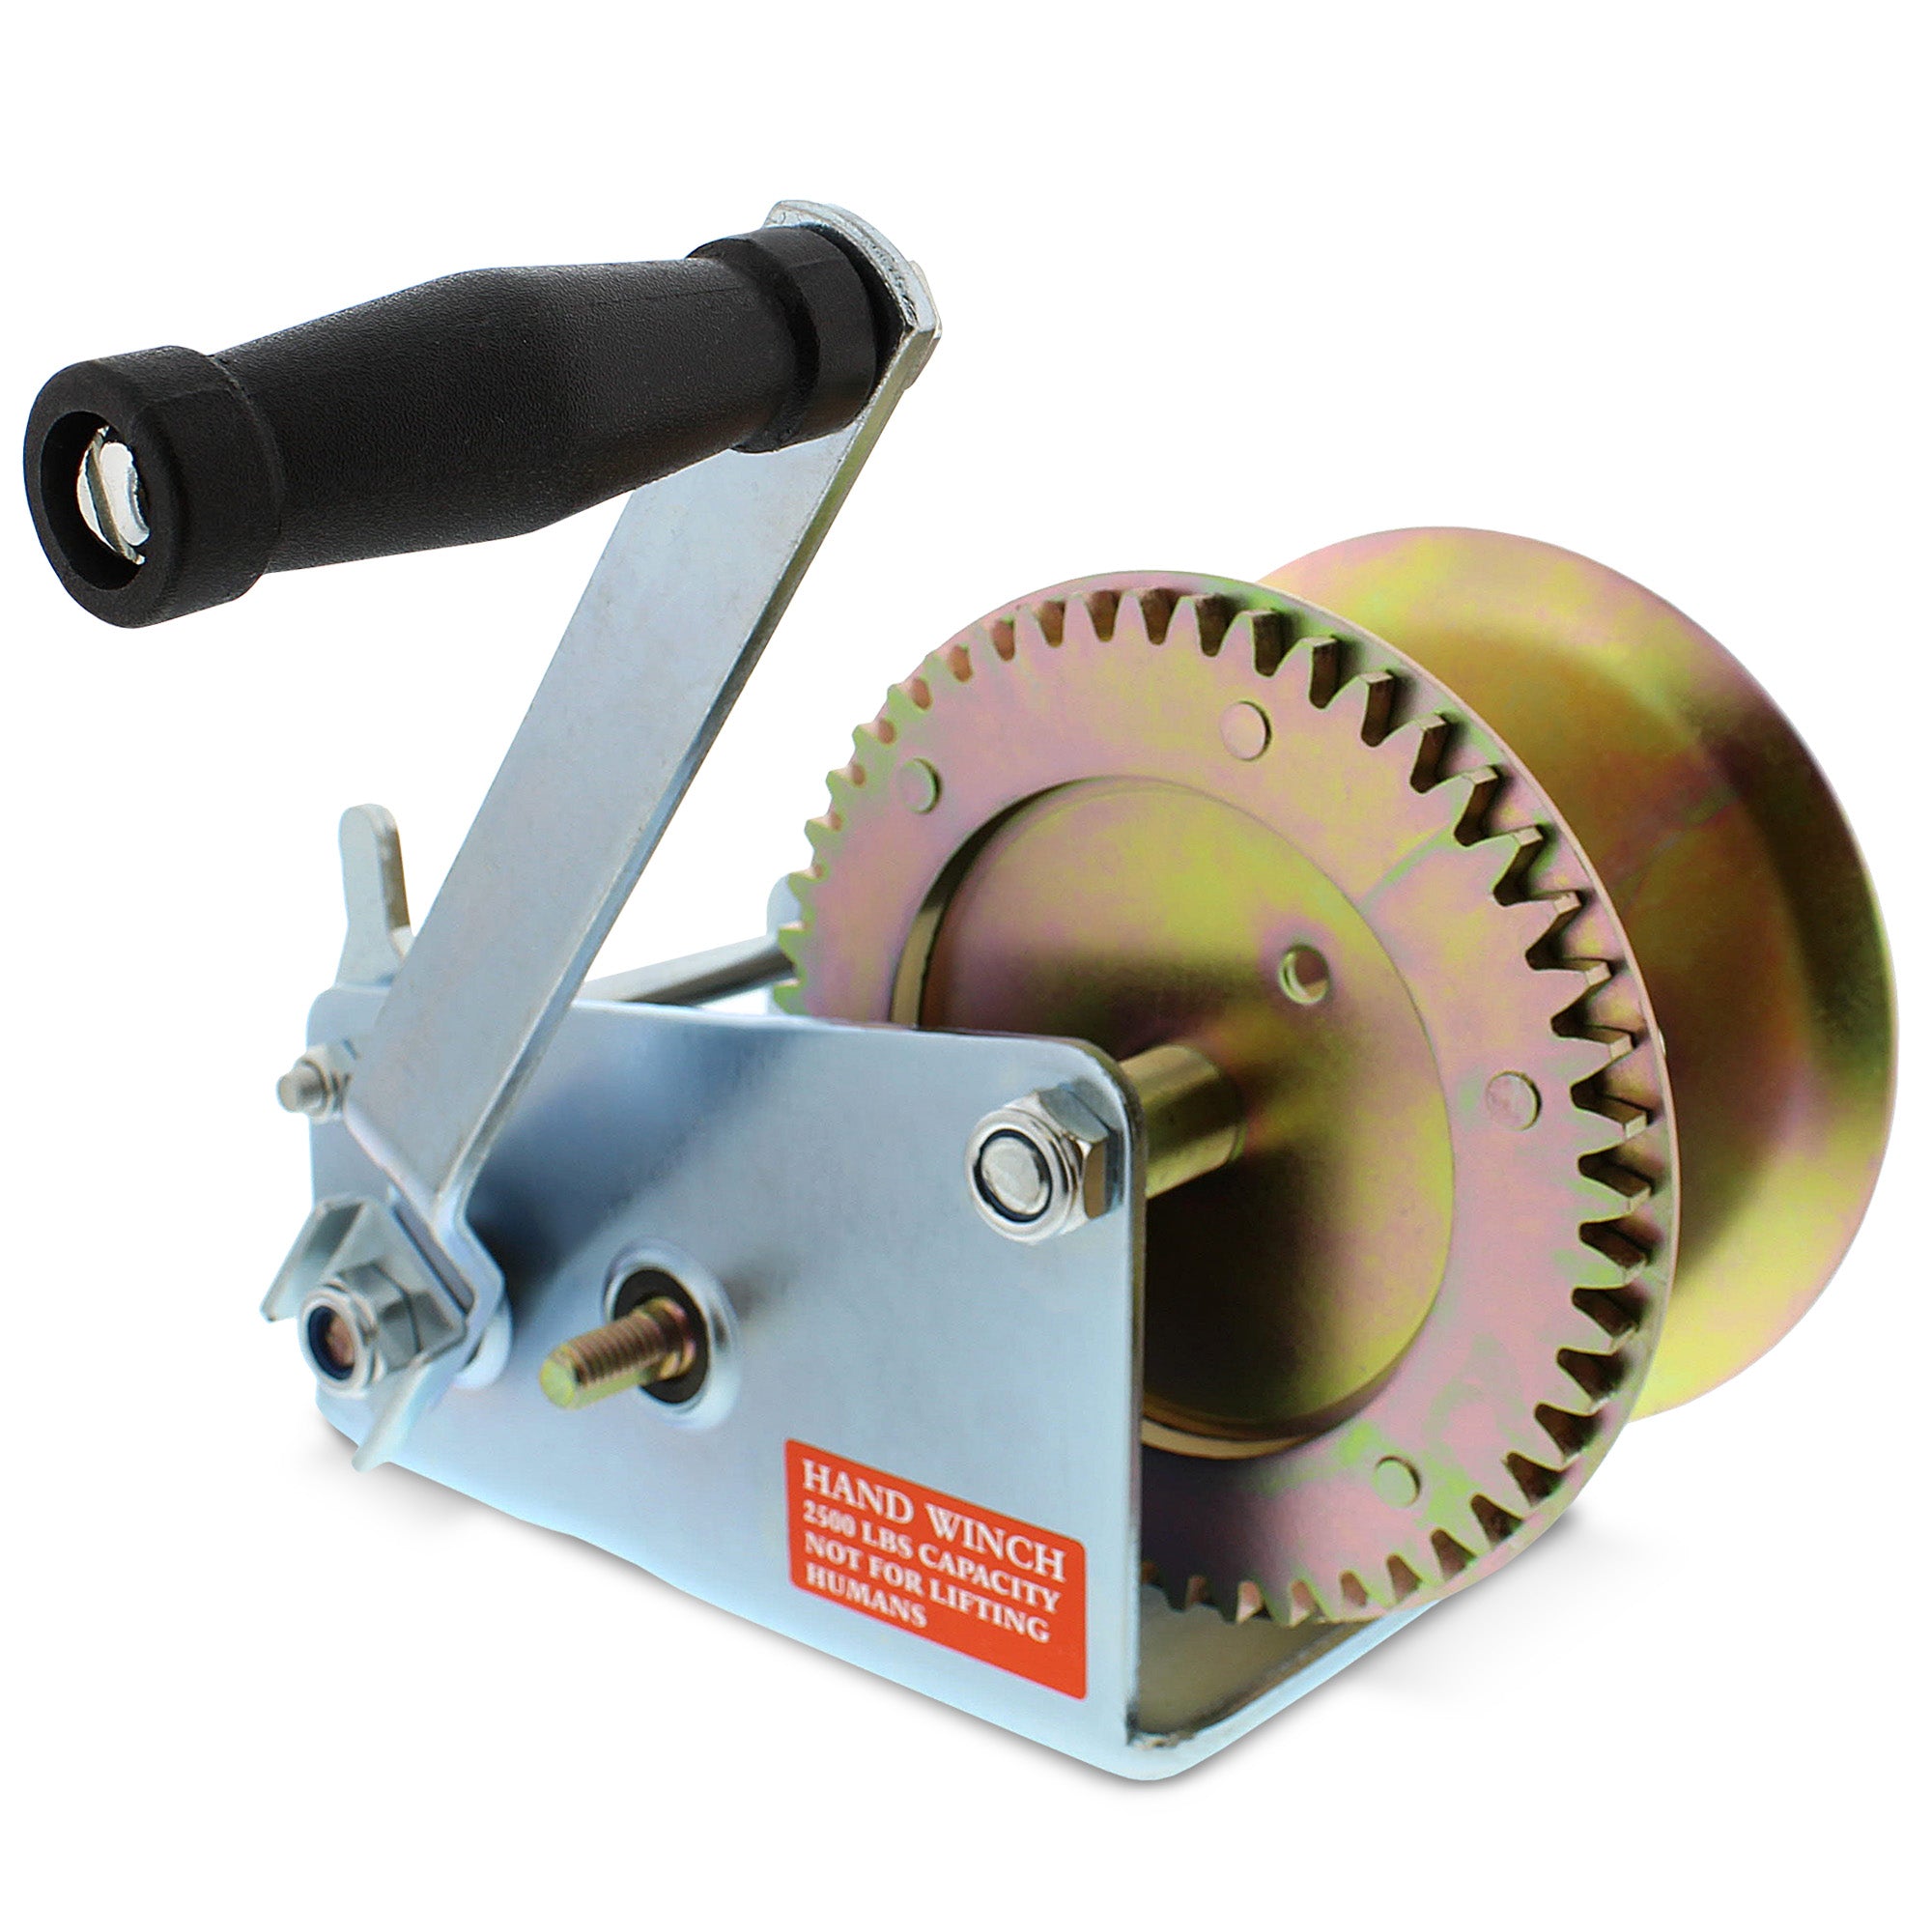 Heavy Duty Hand Crank Gear Winch and Cable